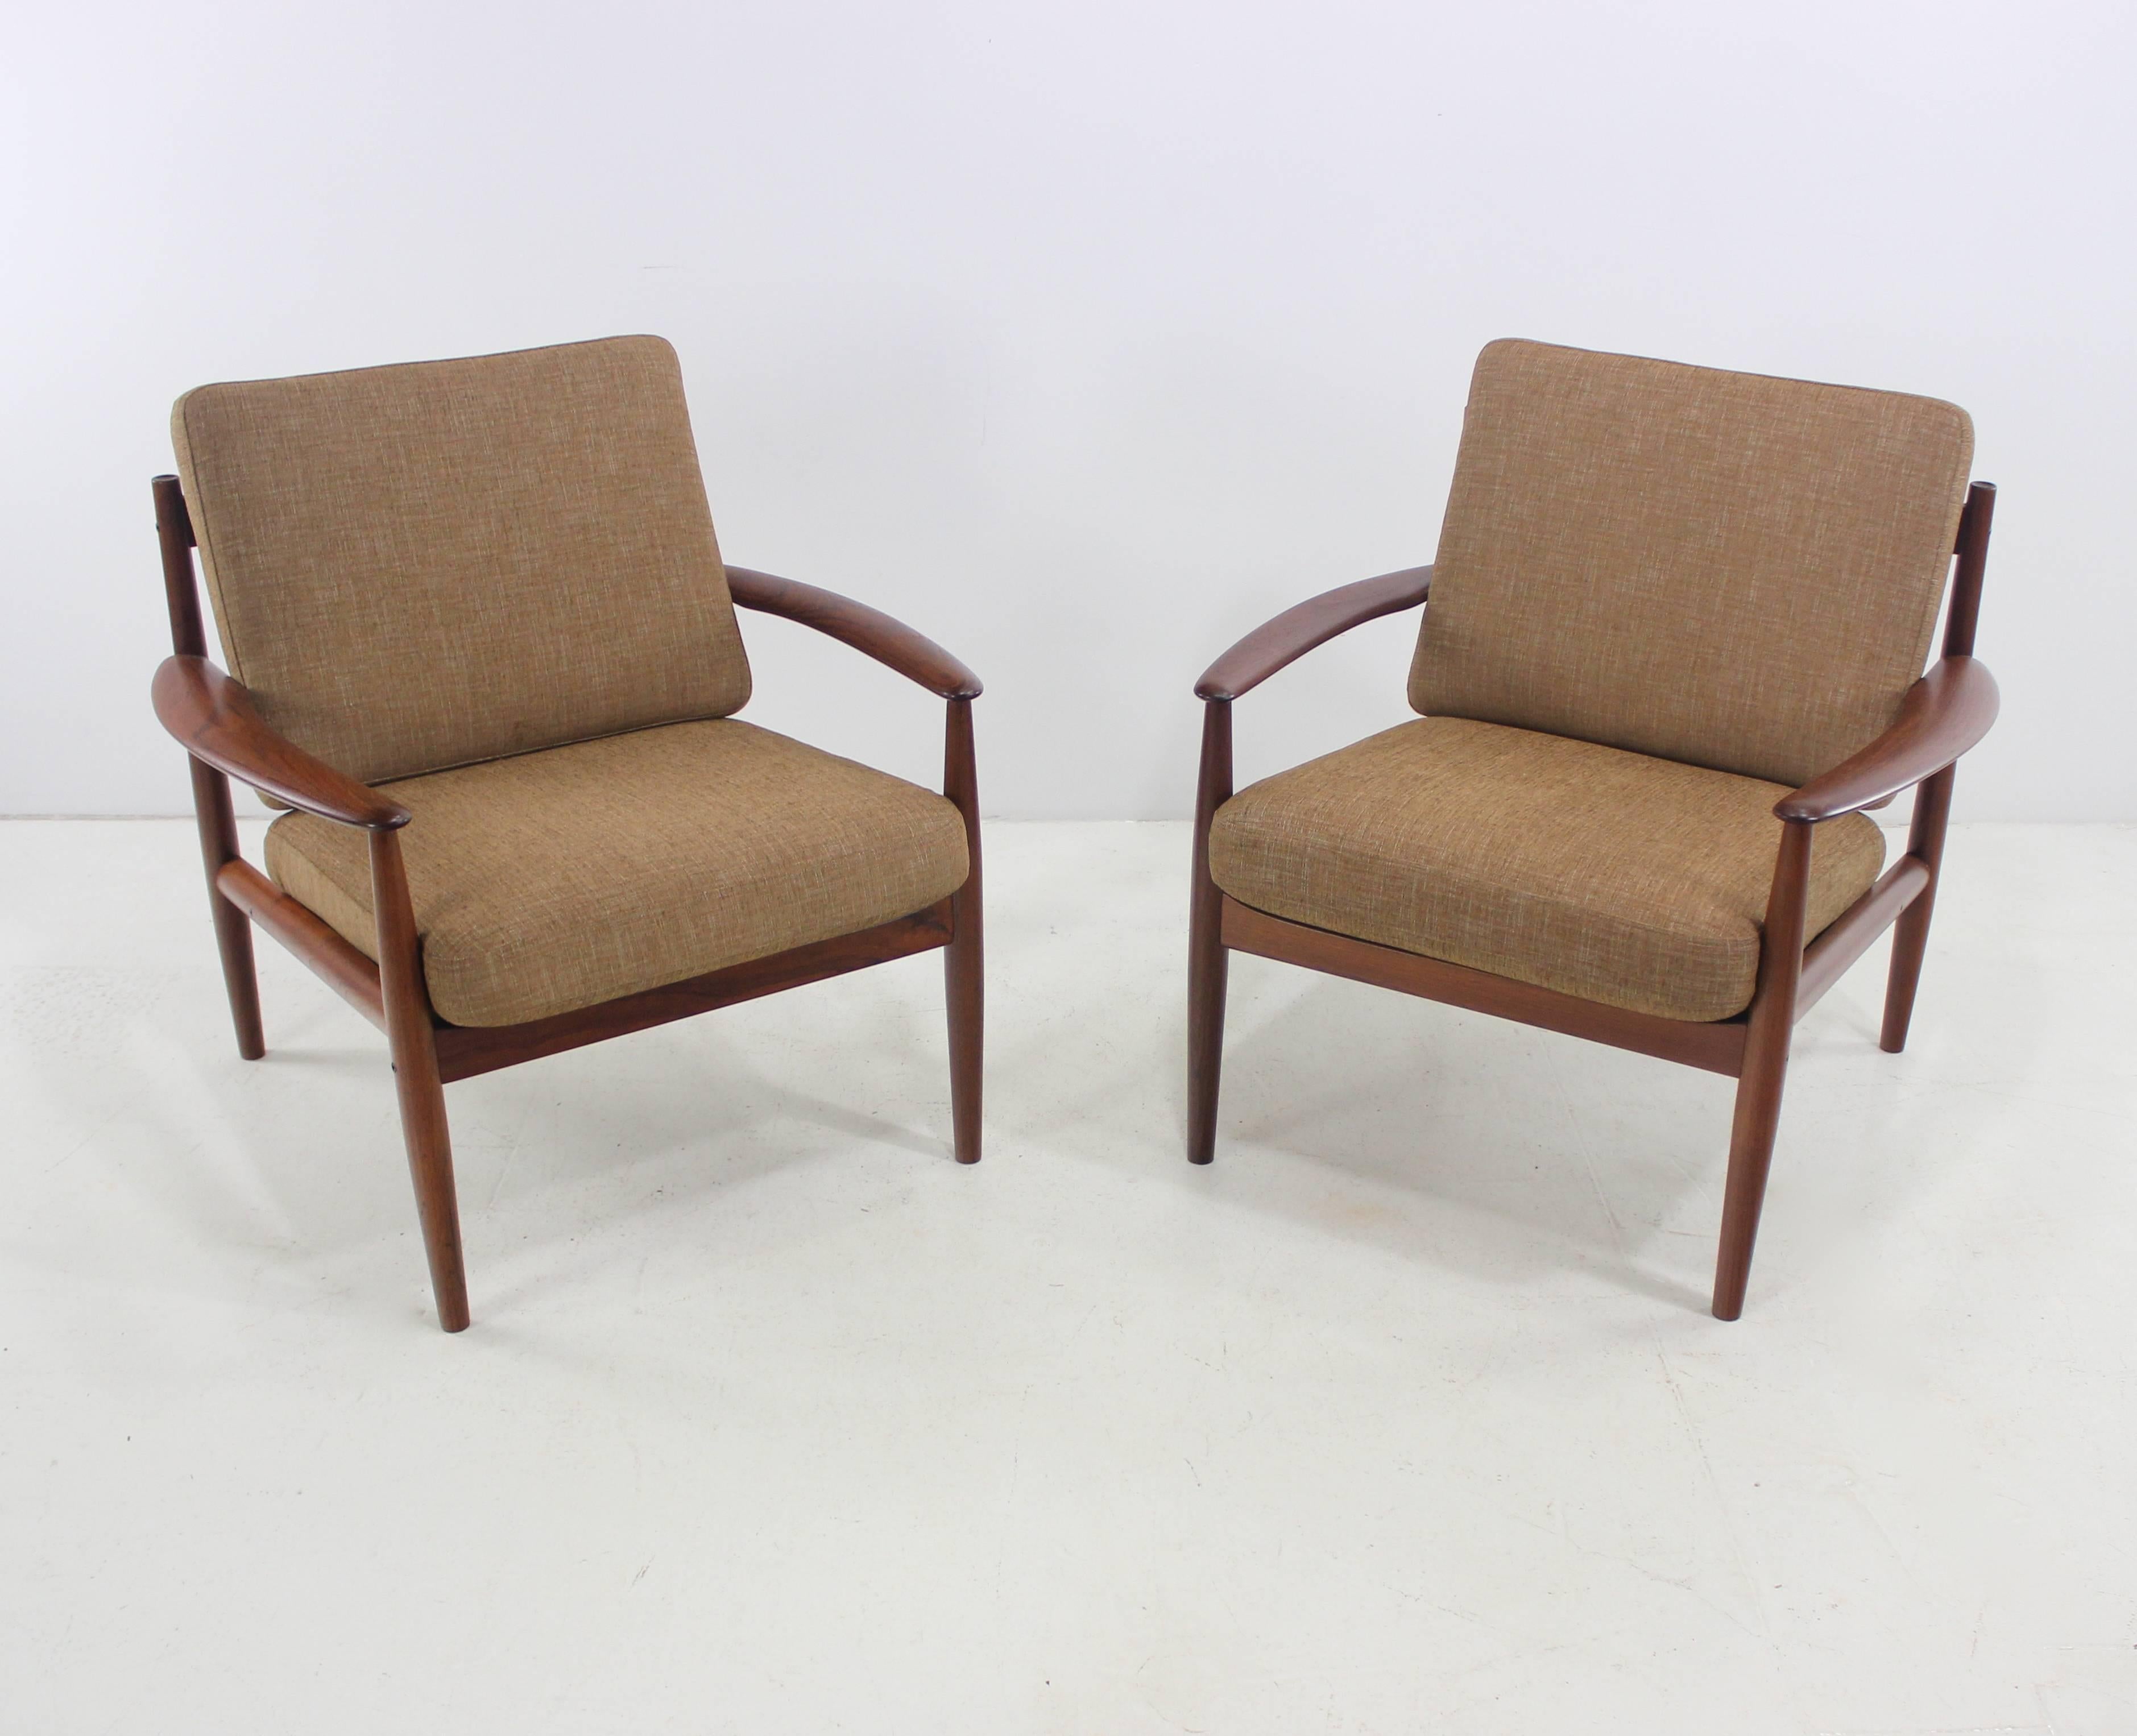 Two Danish modern armchairs designed by Grete Jalk. 
Late 1950s-1960s.
France & Son, makers.
Teak frames with beautifully sculptured wood slat backs and cable supports.
Cushions contain original metal innersprings wrapped in new foam and newly